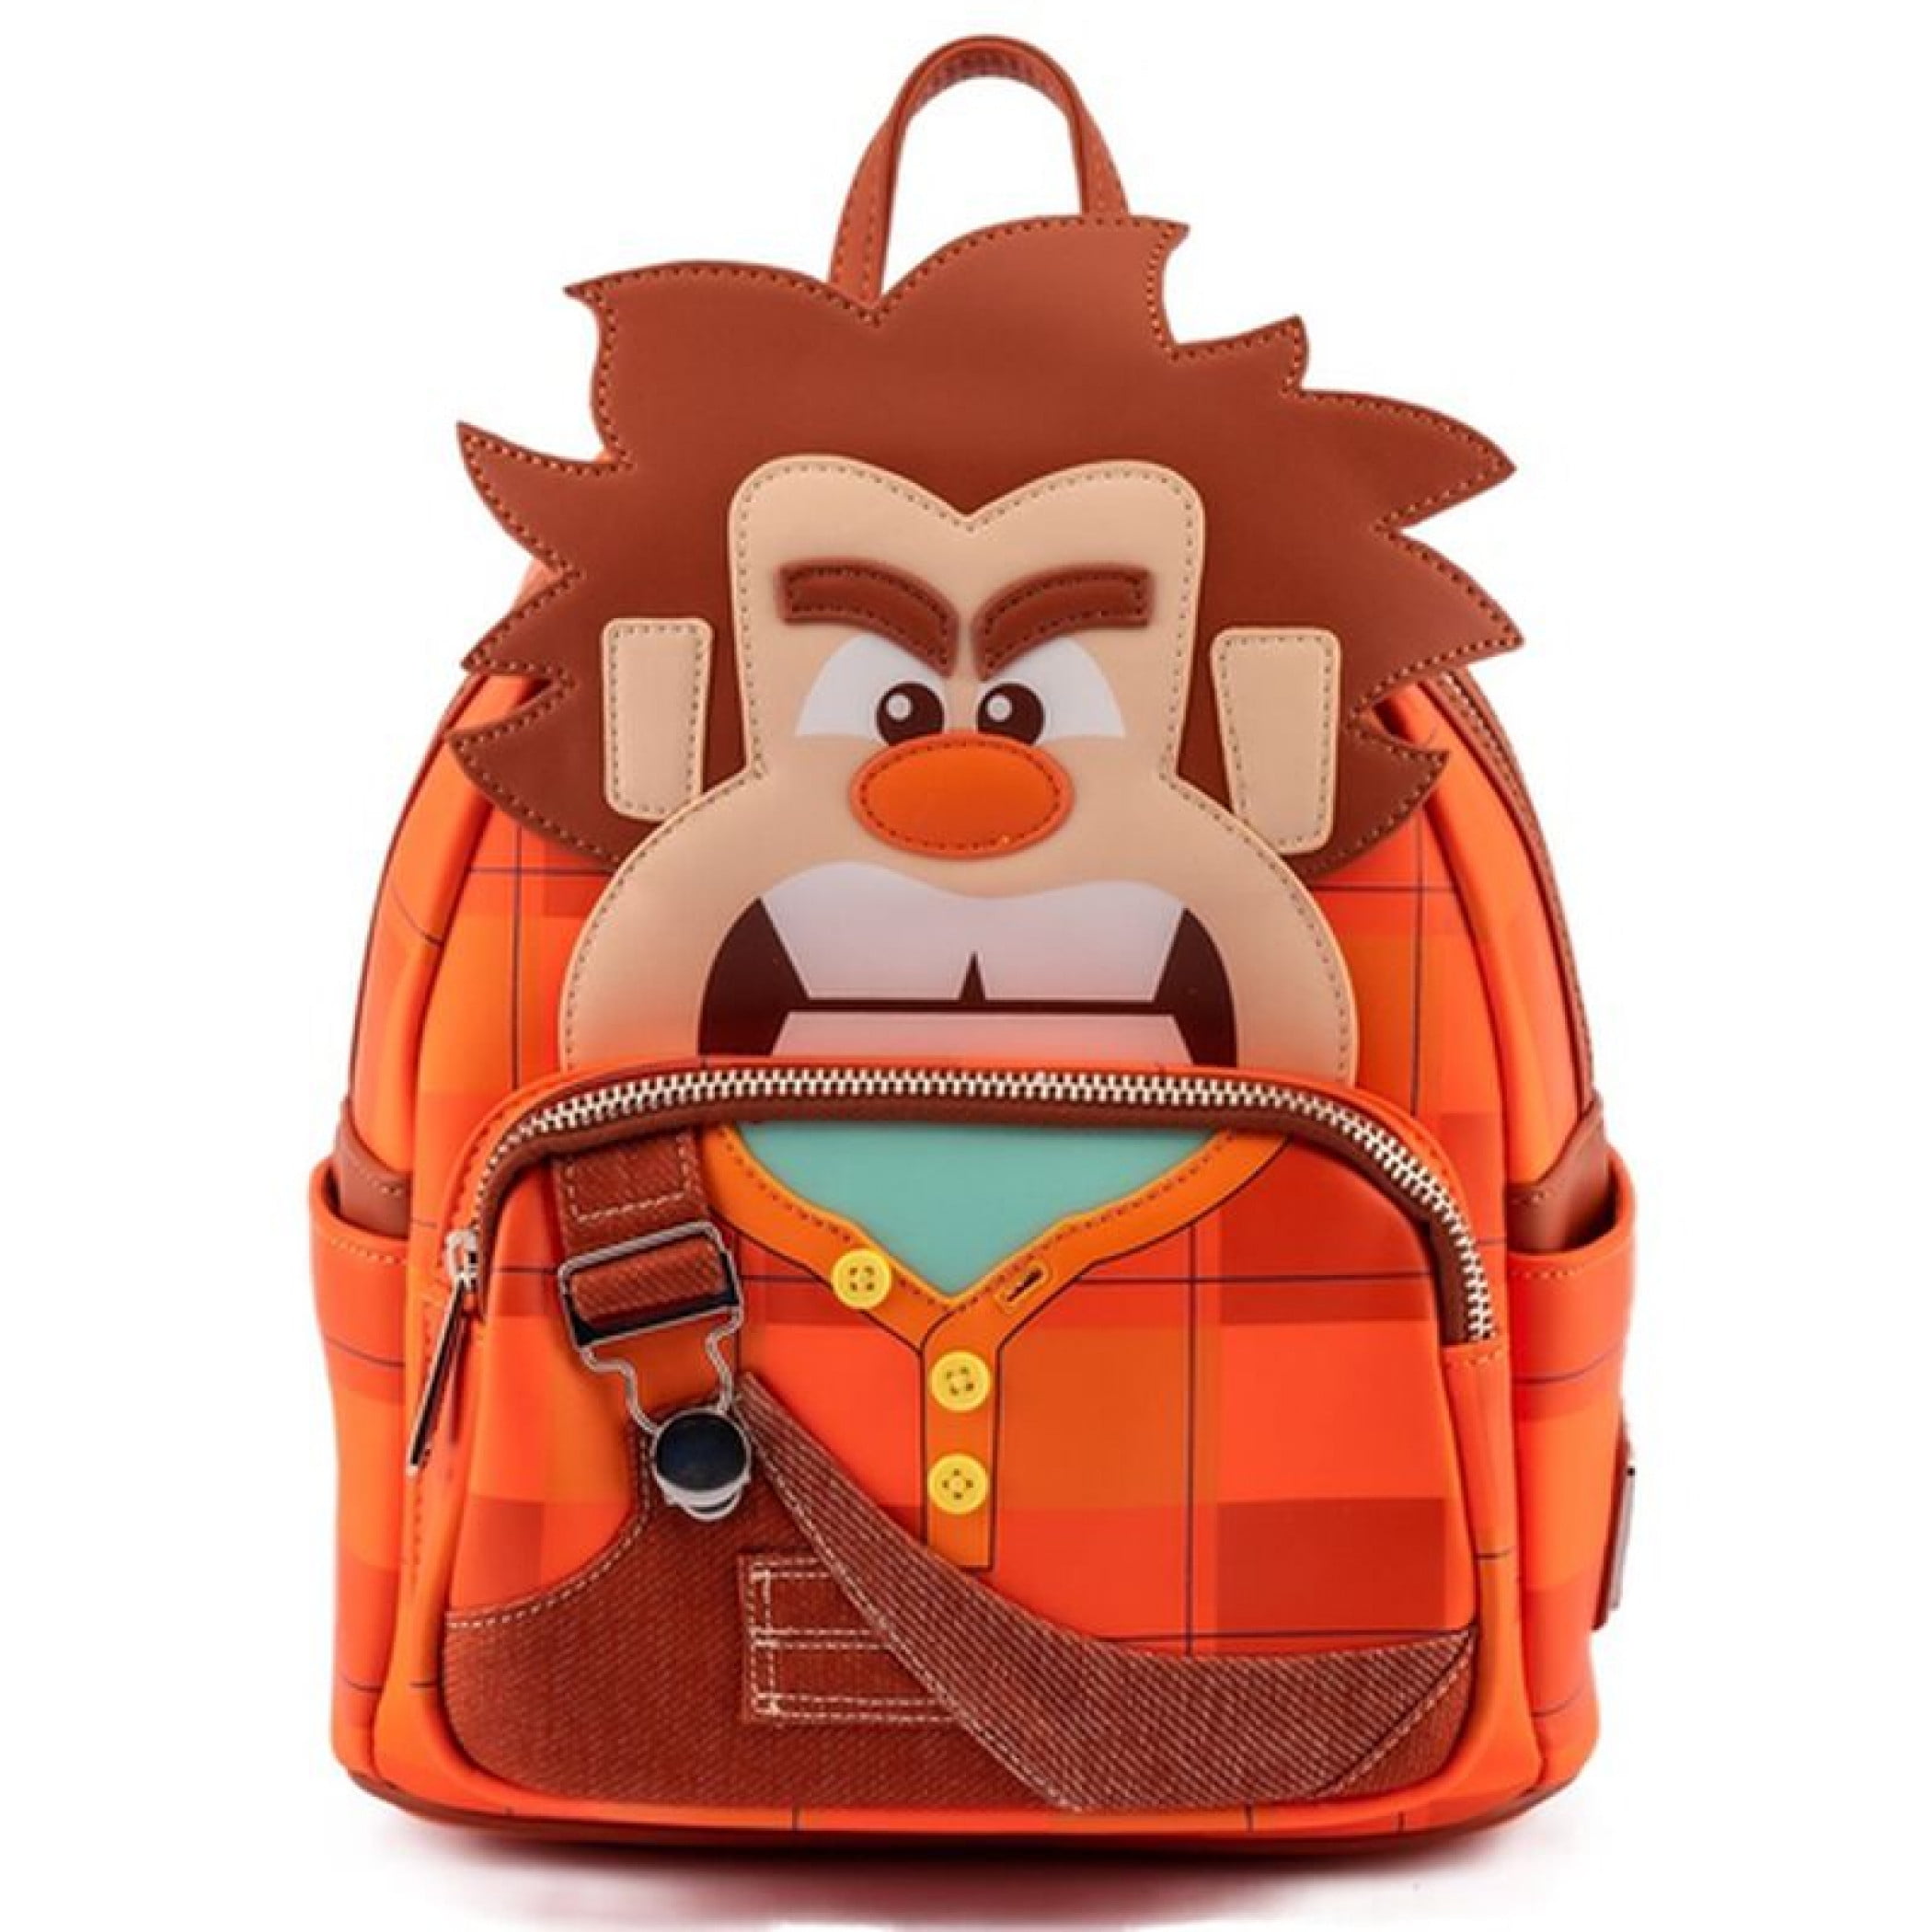 Disney 867424 Wreck-It Ralph Cosplay Mini Backpack by Loungefly